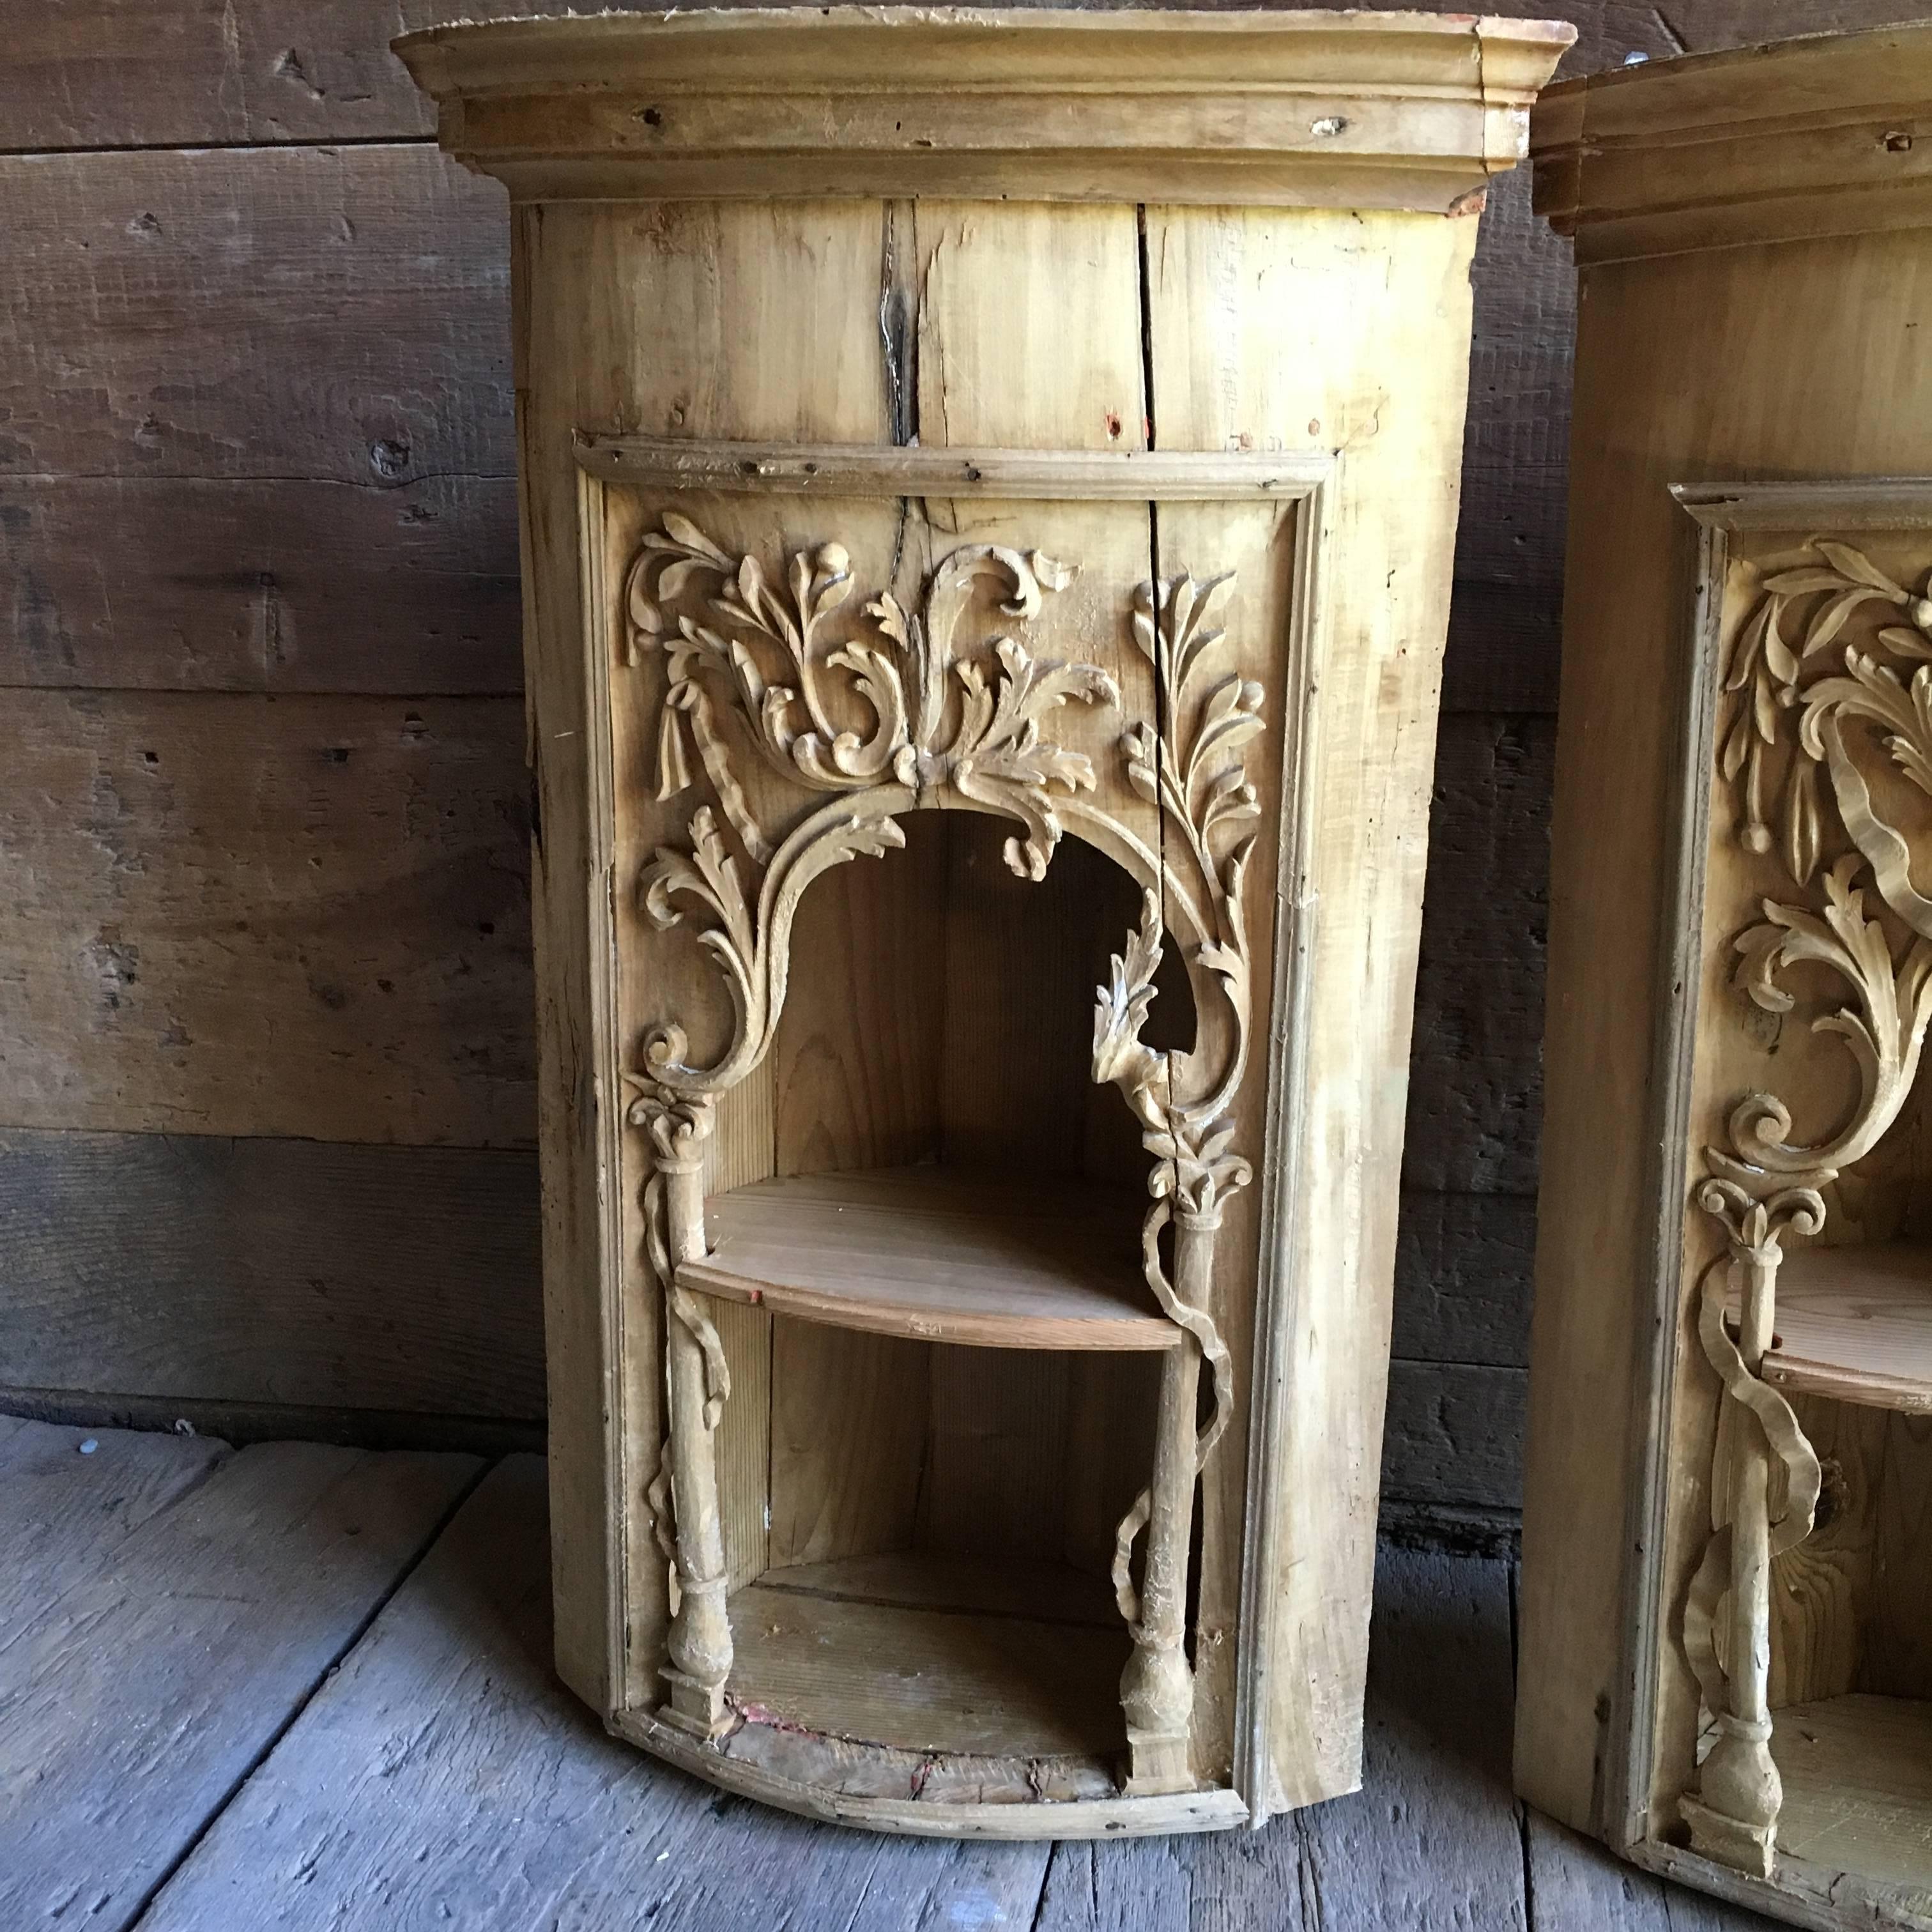 A pair of stripped and bleached pine Italian hanging corner cabinets, circa 1780, with nicely carved facades an interior shelf and a simple cornice.